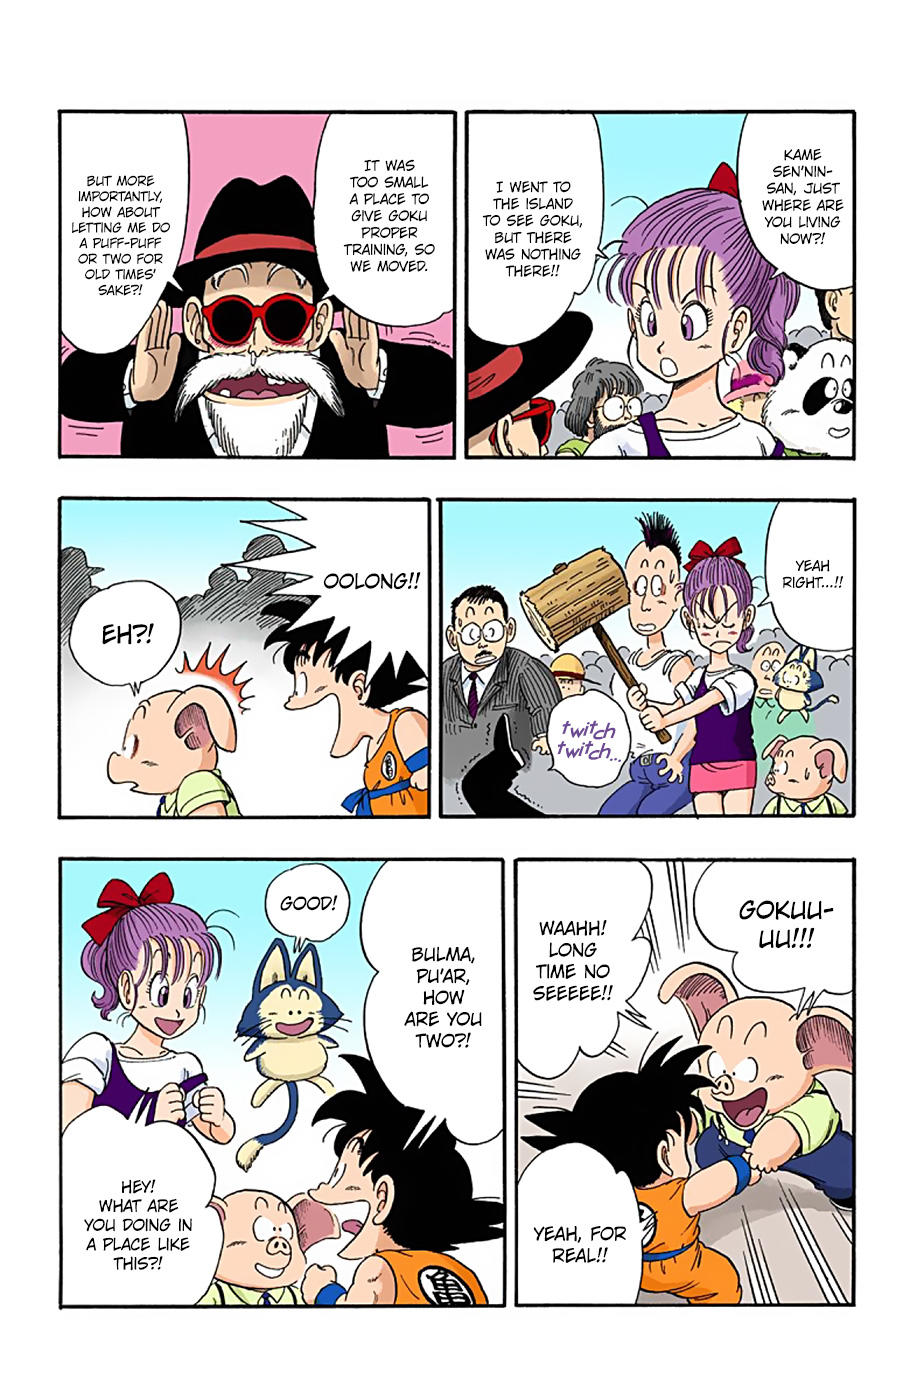 Dragon Ball - Full Color Edition Vol.3 Chapter 35: The Match-Ups Decided!! page 4 - Mangakakalot